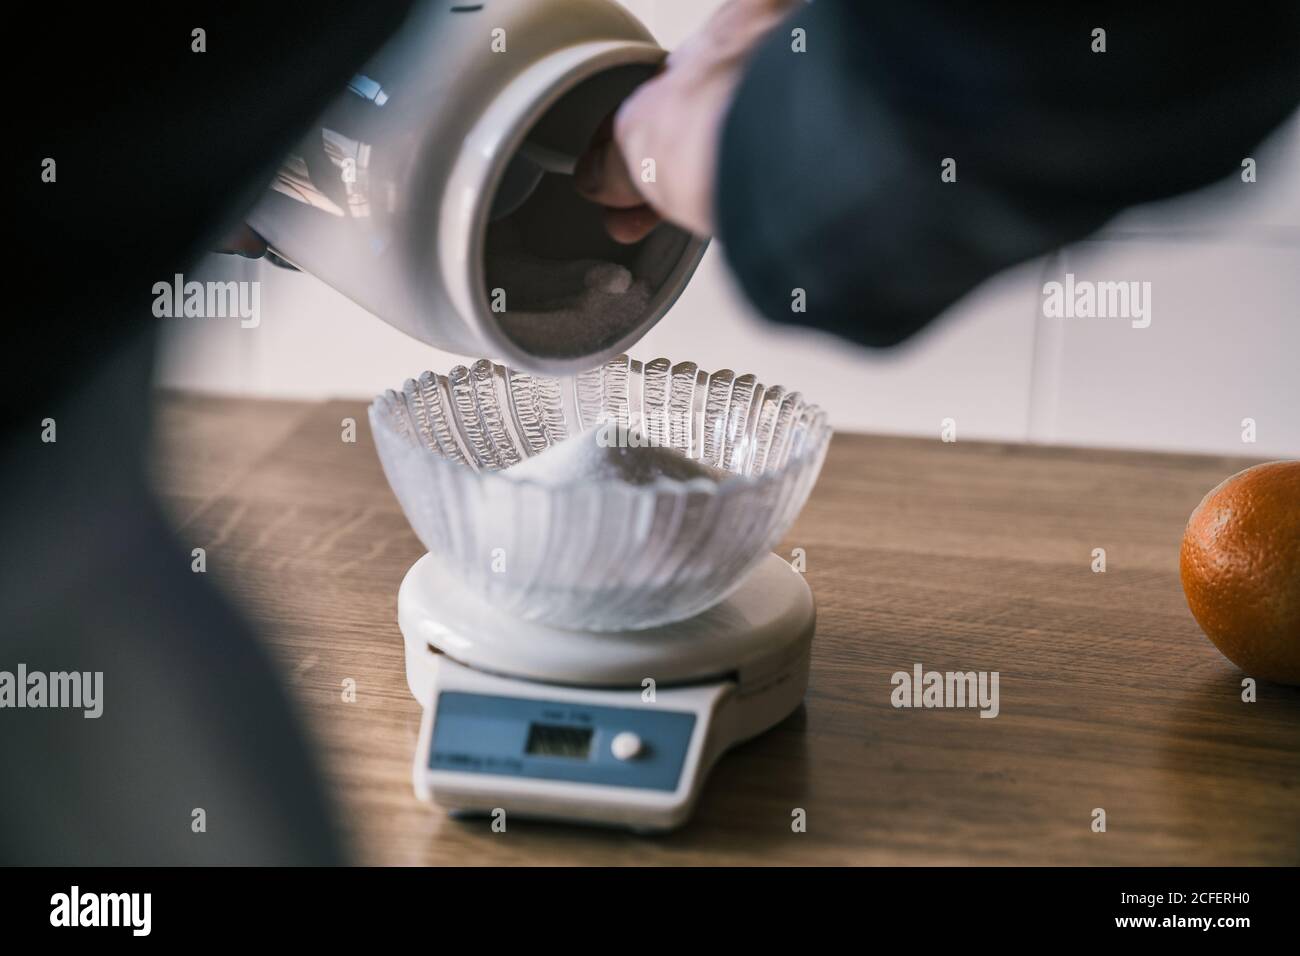 Cropped unrecognizable female hand holding sugar jar spilling and weighting sugar with electronic kitchen scale with glass bowl on top on wooden table Stock Photo